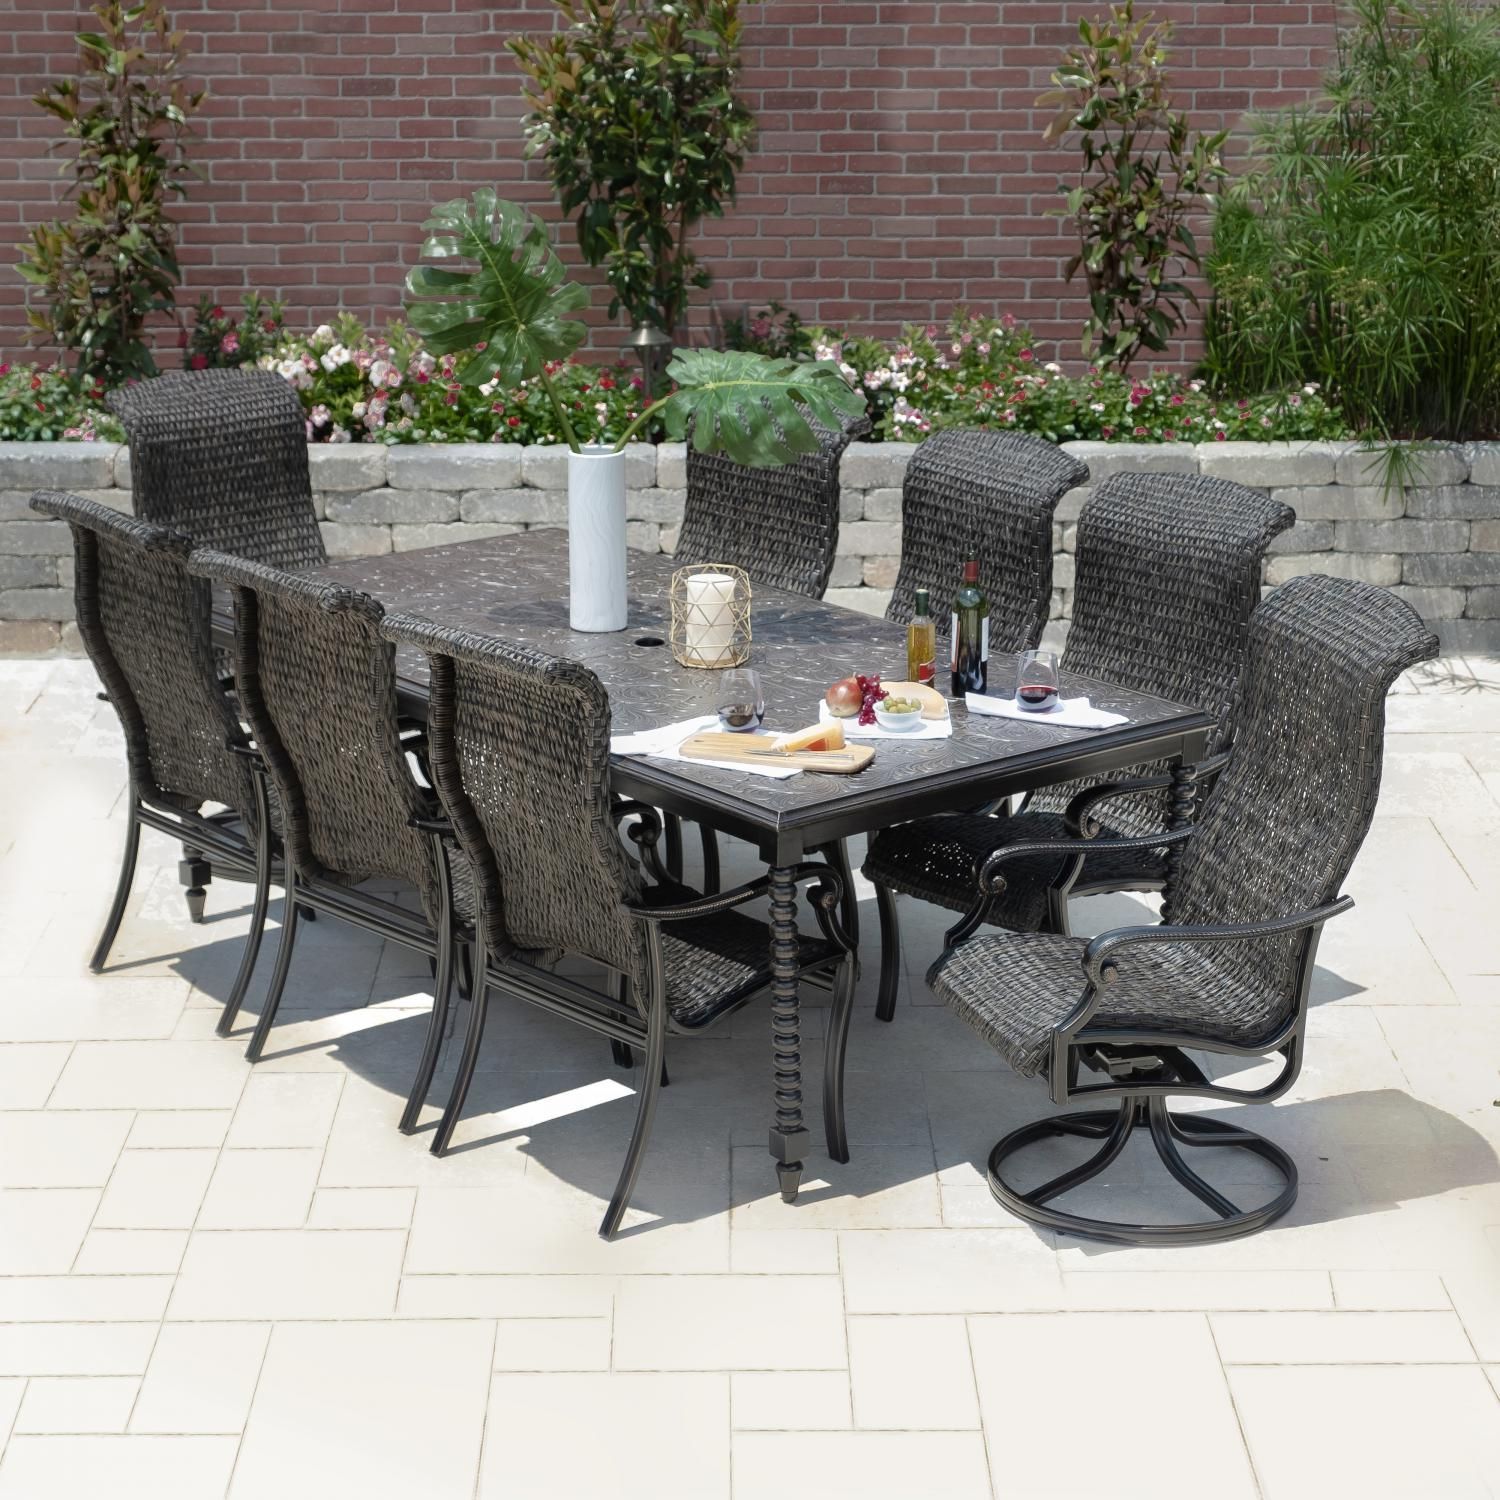 Du Monde 9 Piece Banana Leaf Wicker Patio Dining Set W/ 90 X 46 Inch Throughout 9 Piece Patio Dining Sets (View 13 of 15)